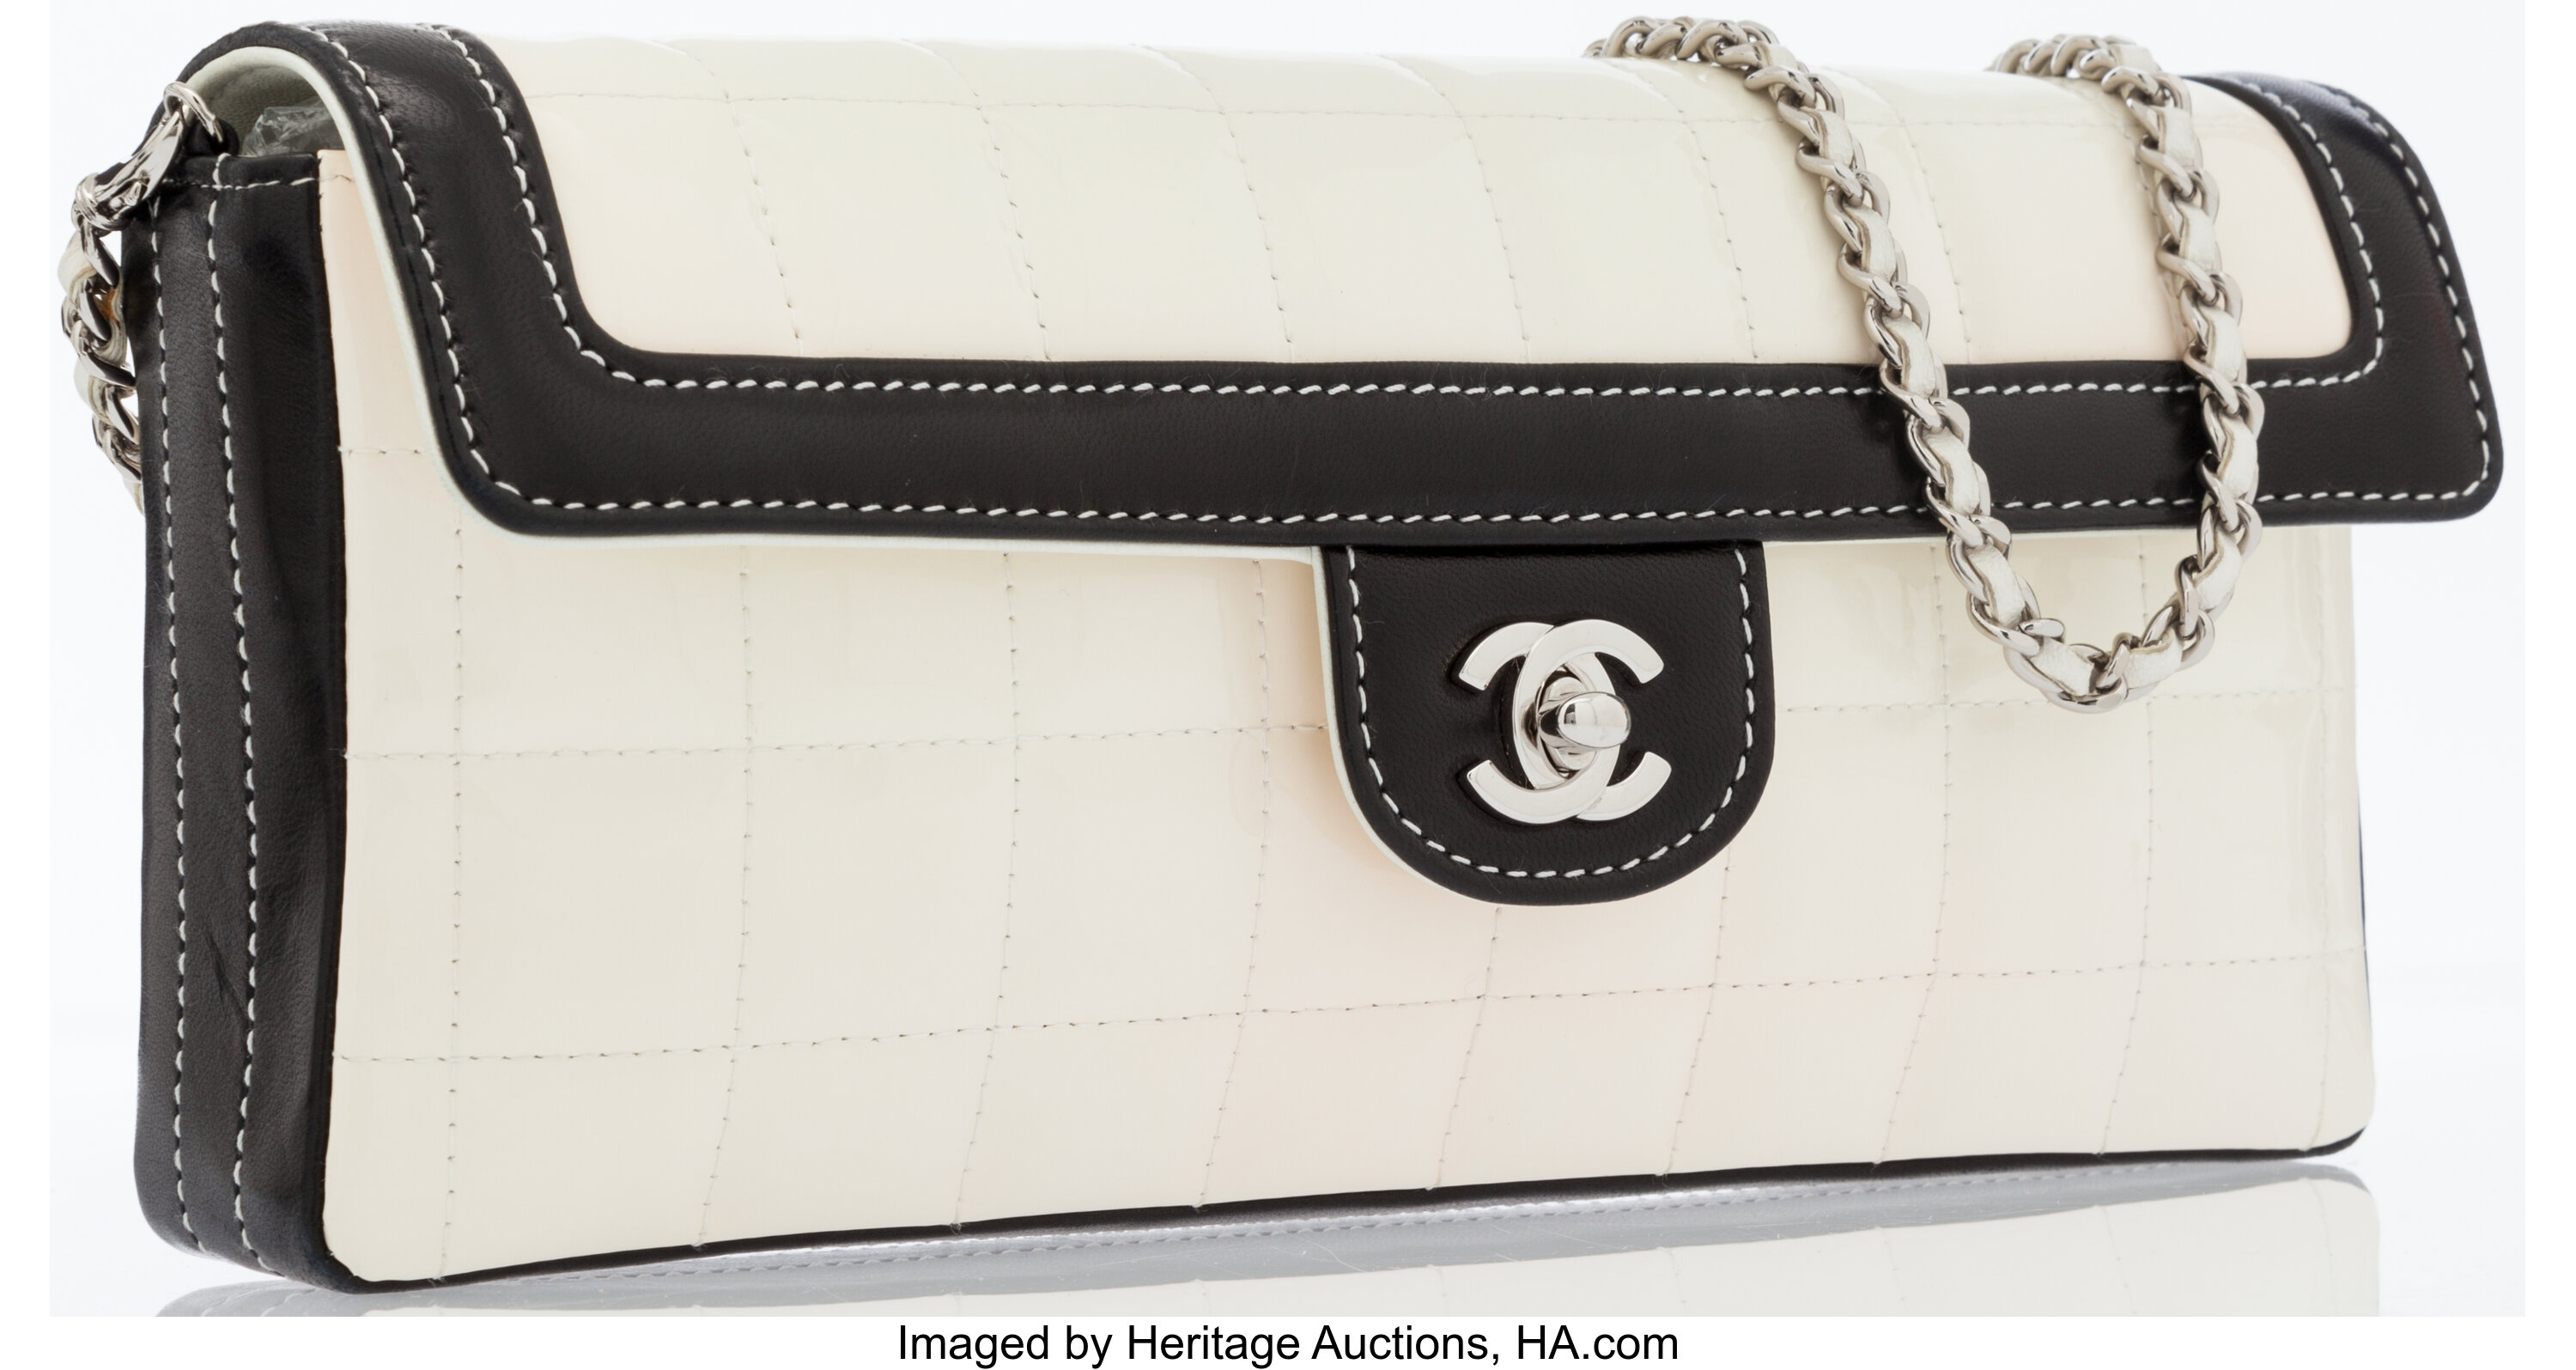 Chanel Coco Cabas Shoulder Bags for Women